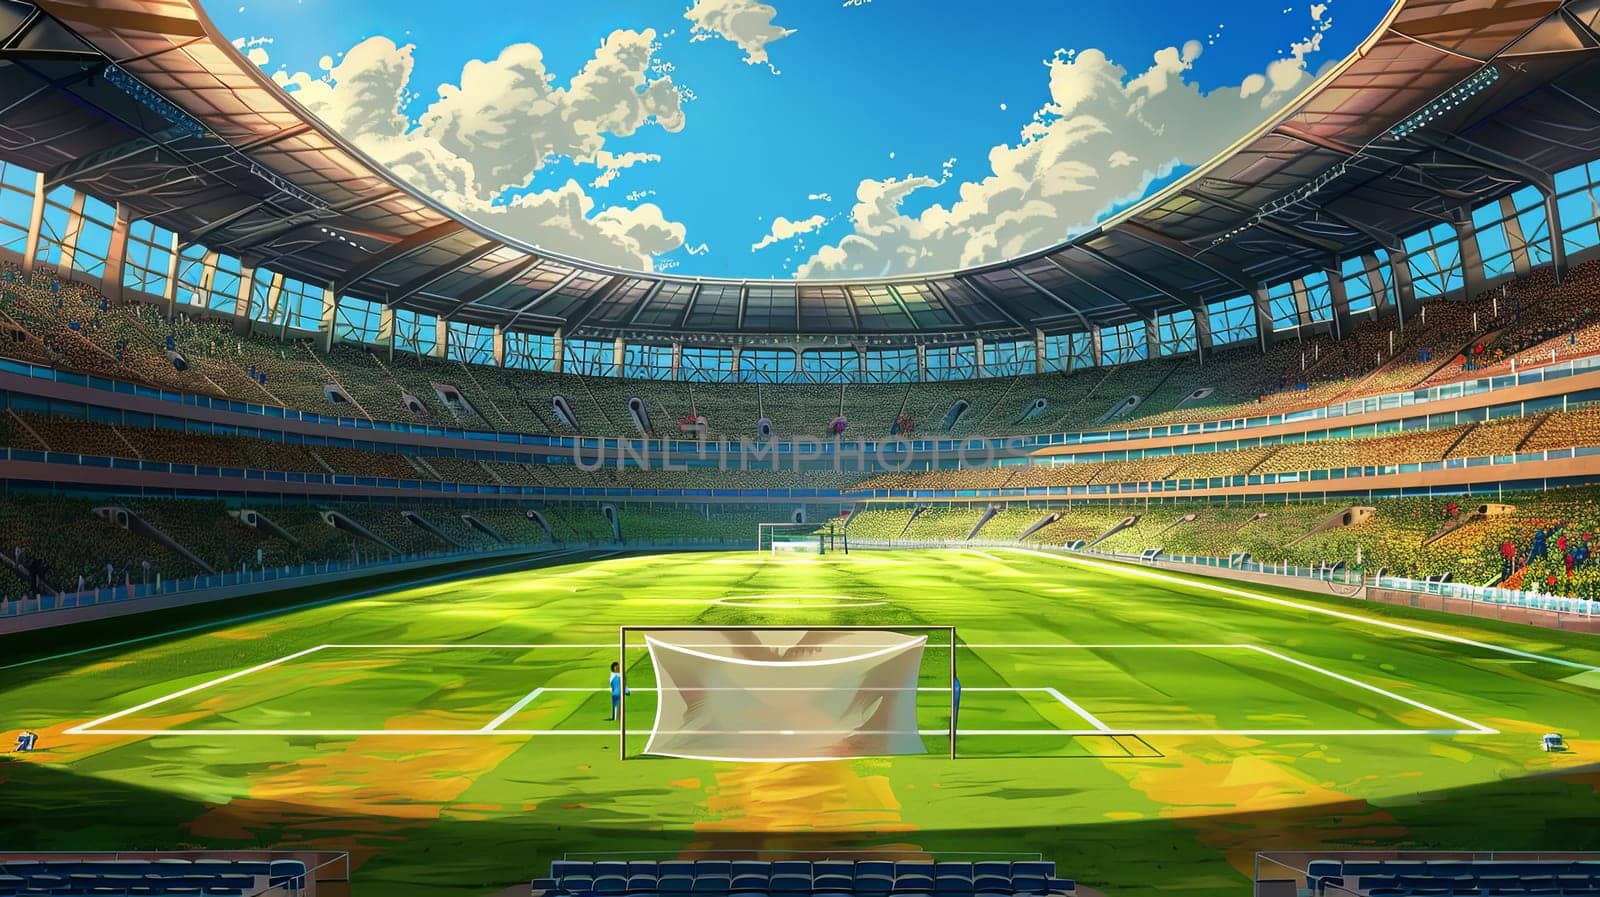 A detailed painting depicting a tennis court within a bustling stadium setting.